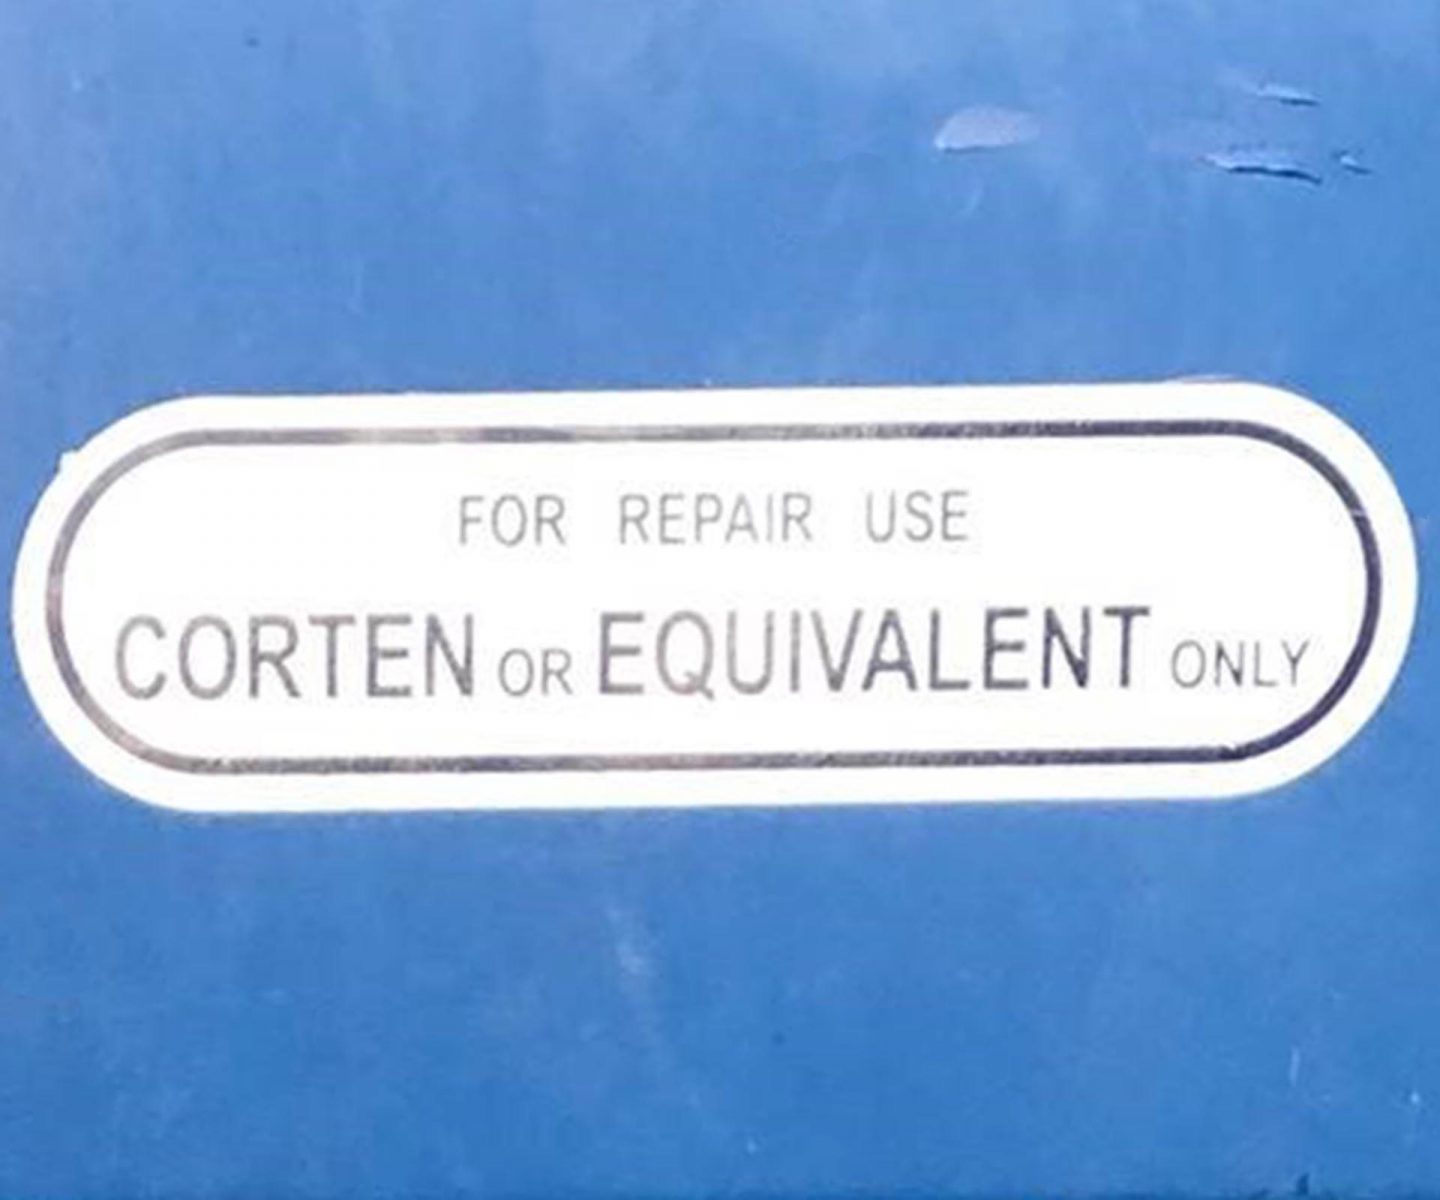 for repair use corten or equivalent only